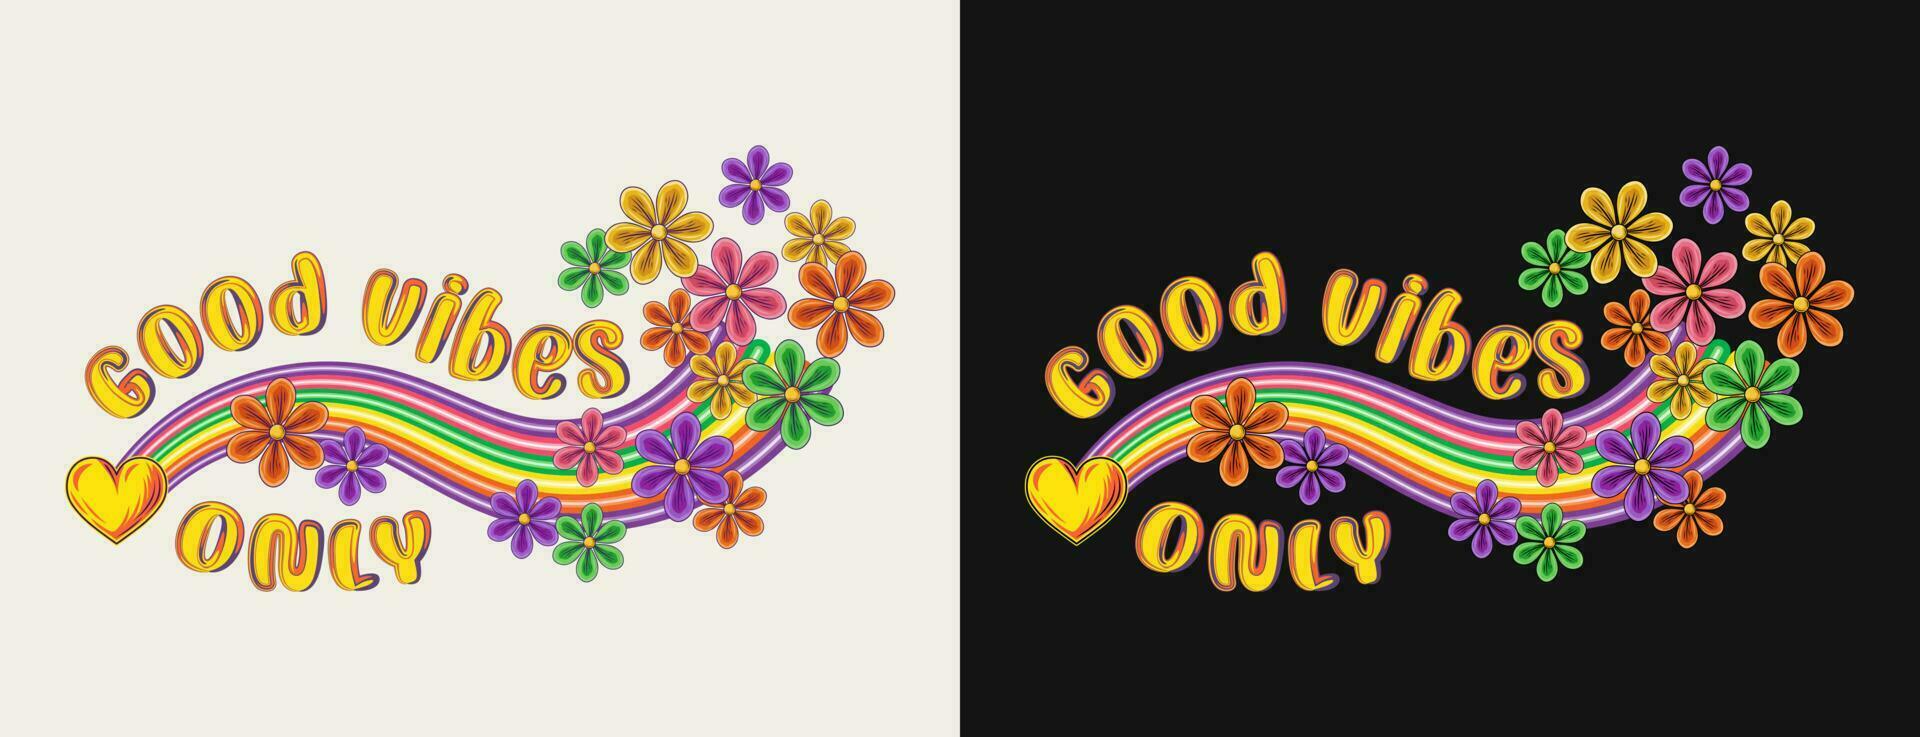 Summer label with rainbow wave, flying chamomiles, heart, text Good vibes. Groovy, hippie retro style. Concept of harmony, balance, positivity. For clothing, apparel, T-shirts, surface decoration vector